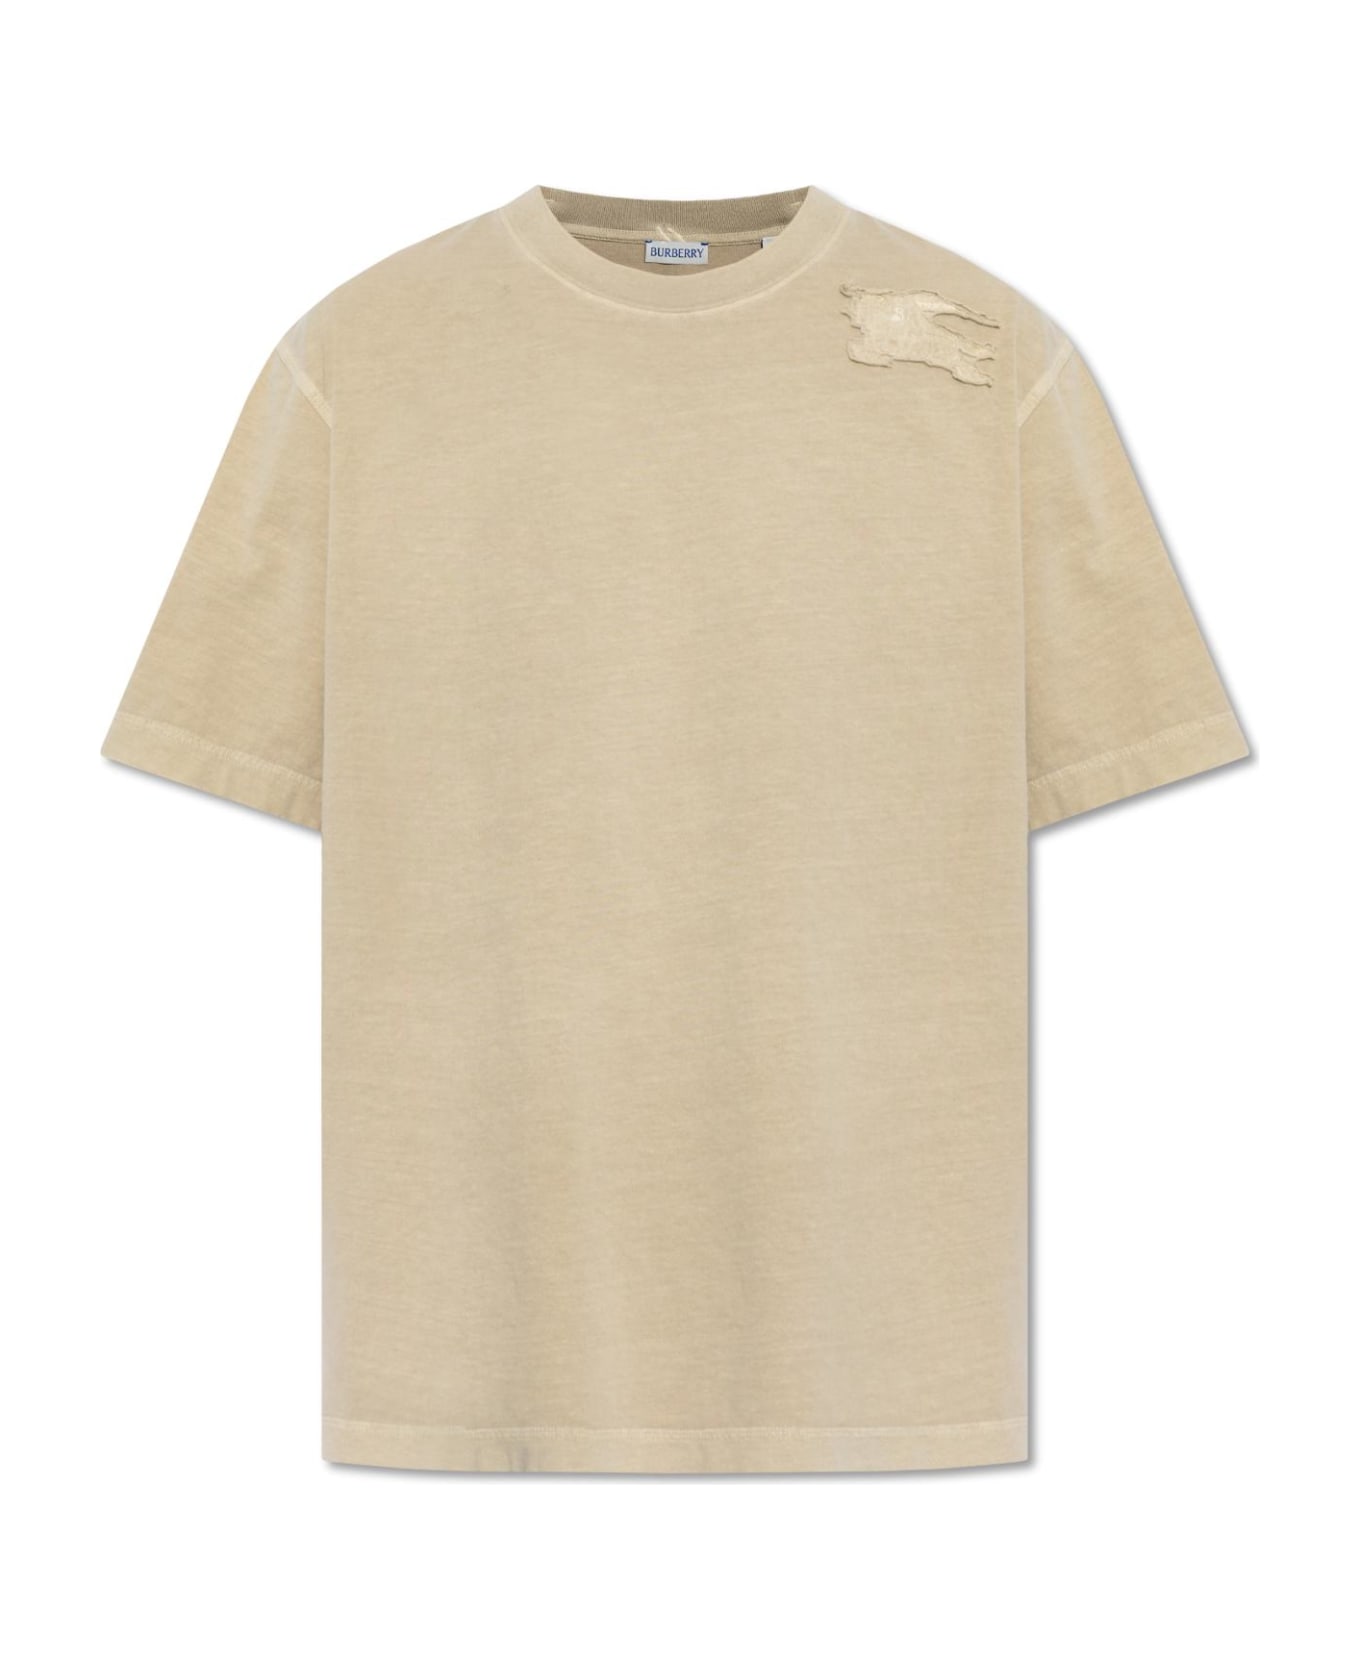 Burberry T-shirt With A Patch - BEIGE